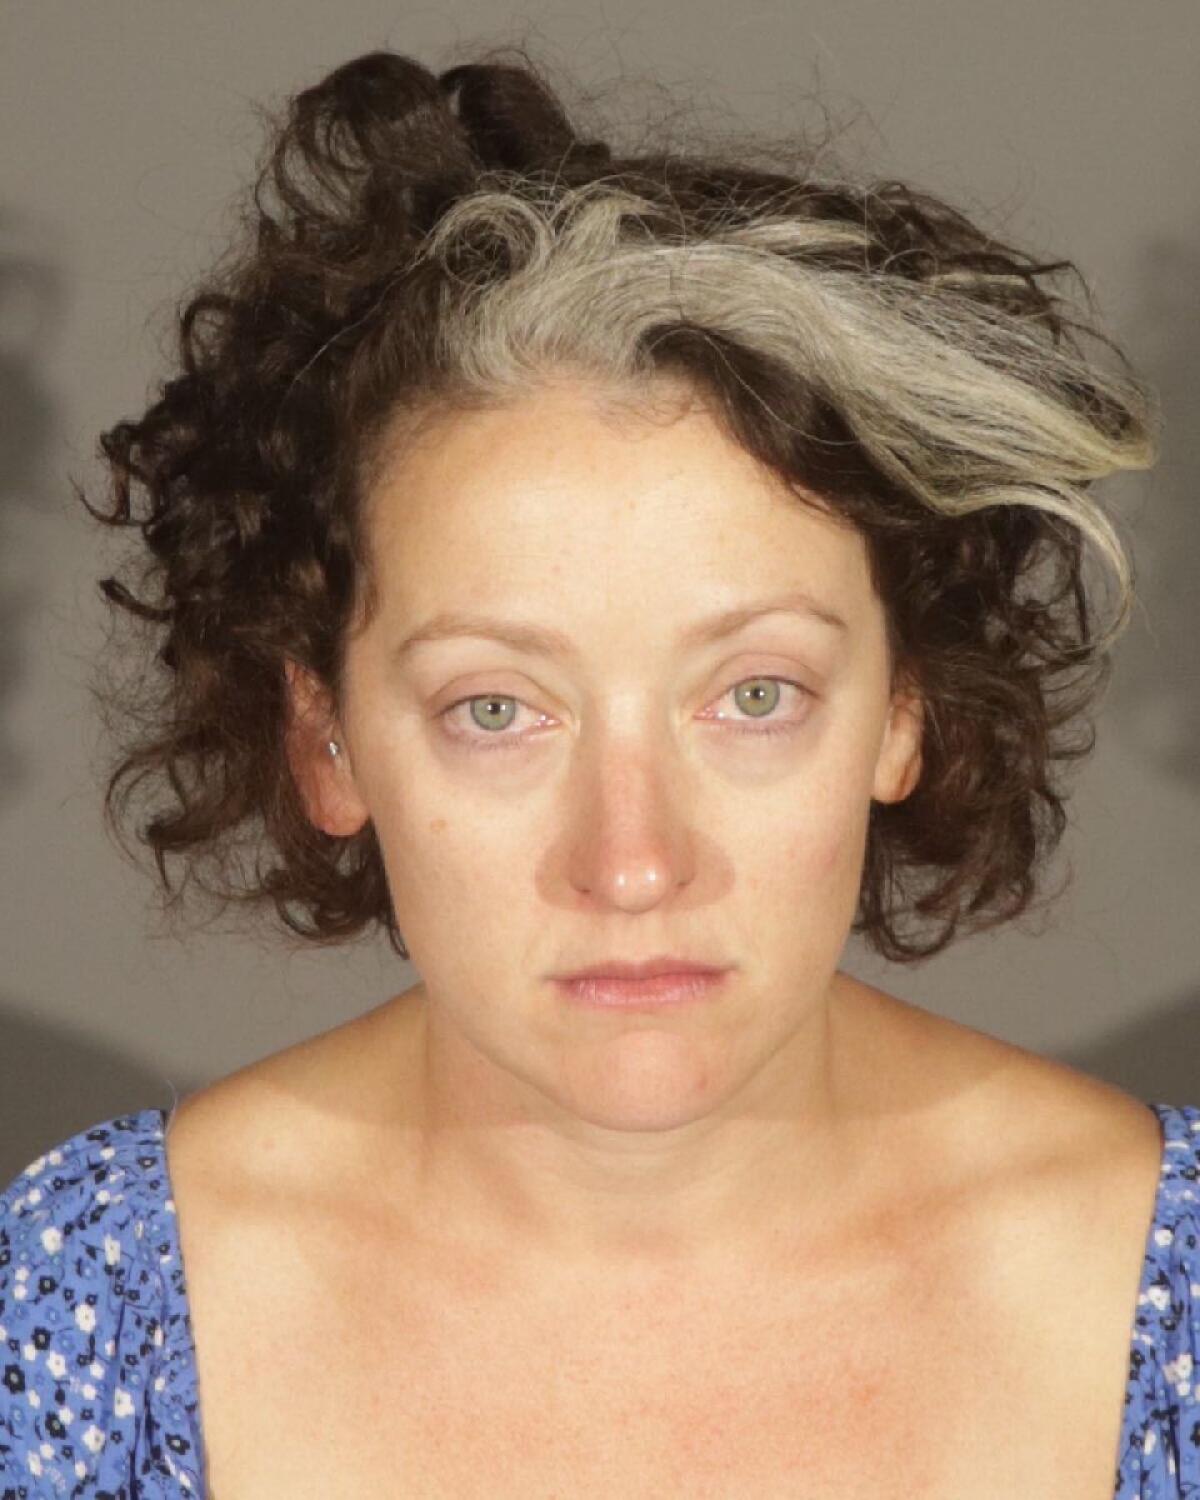 A mug shot of a 37-year-old woman with a white streak in her hair